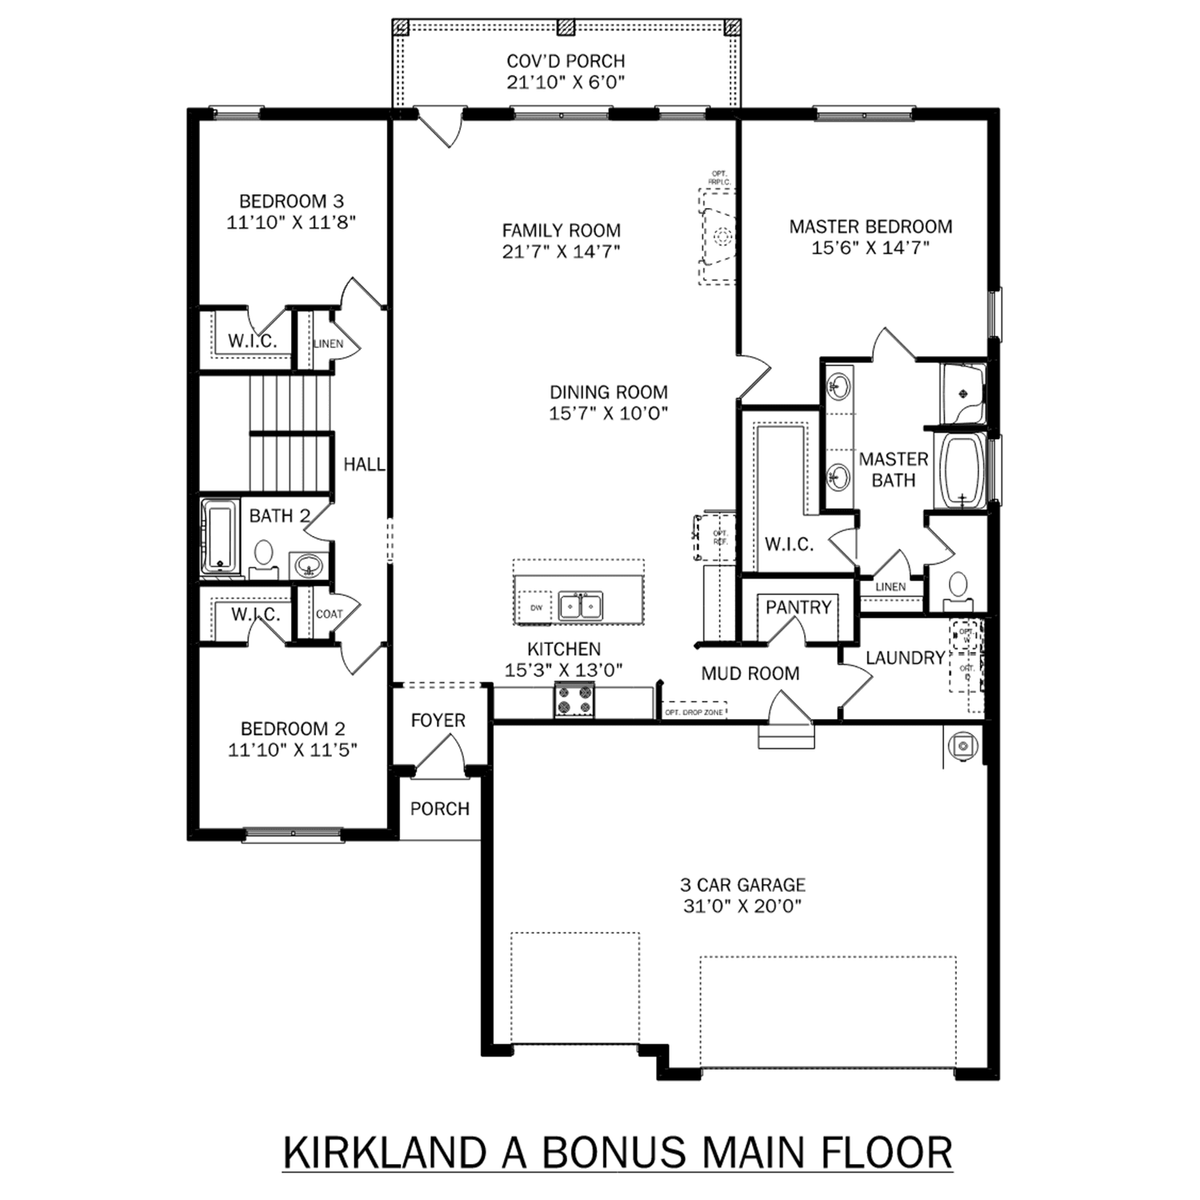 1 - The Kirkland with Bonus buildable floor plan layout in Davidson Homes' Kendall Downs community.